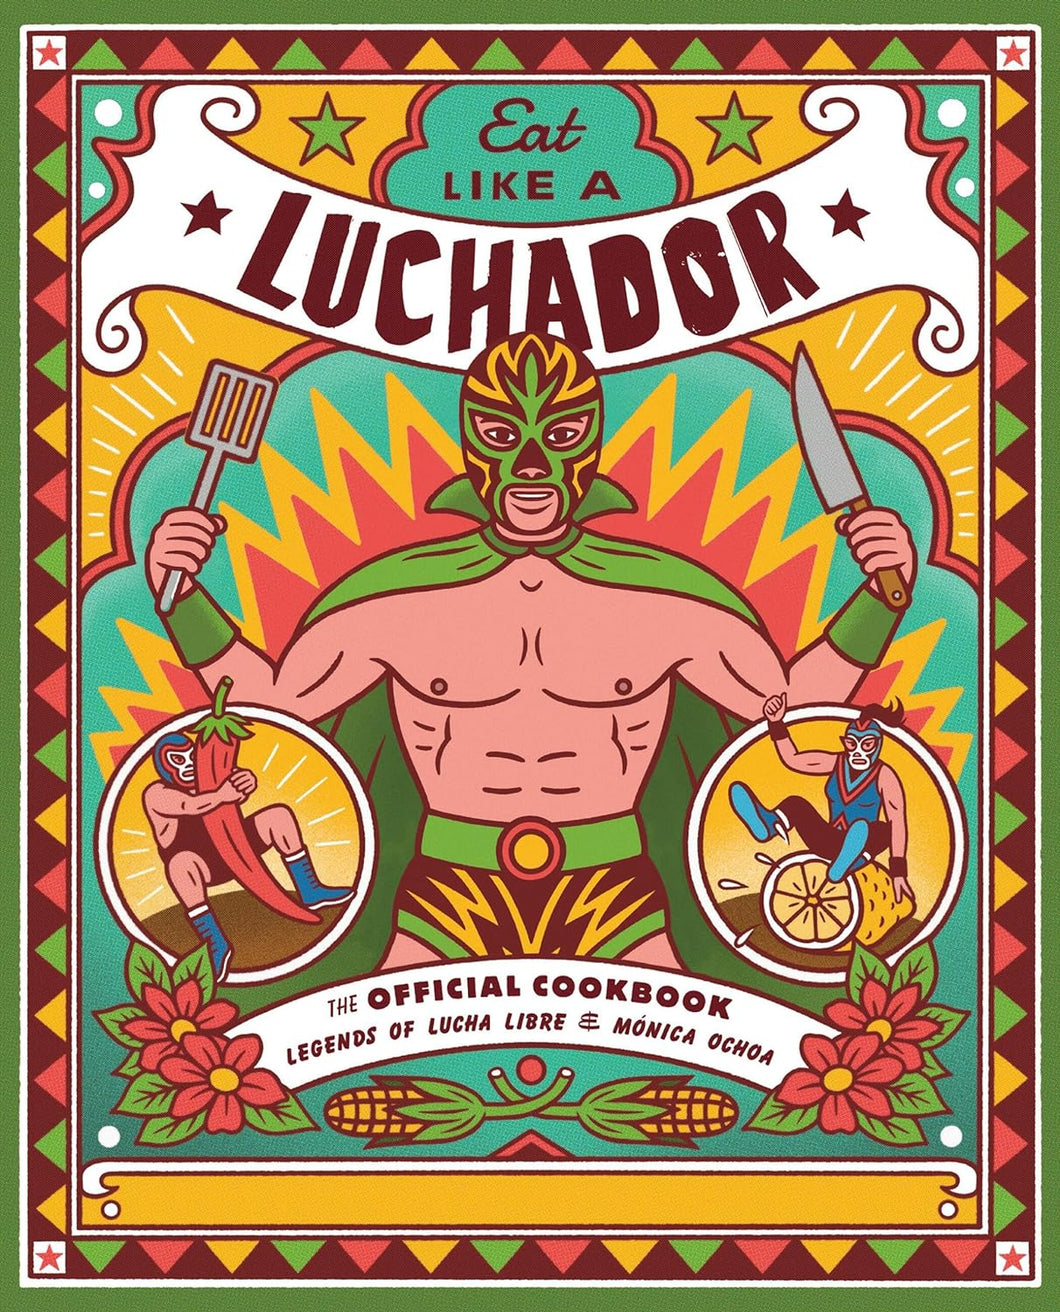 Eat Like a Luchador: The Official Cookbook by Legends of Lucha Libre and Mónica Ochoa